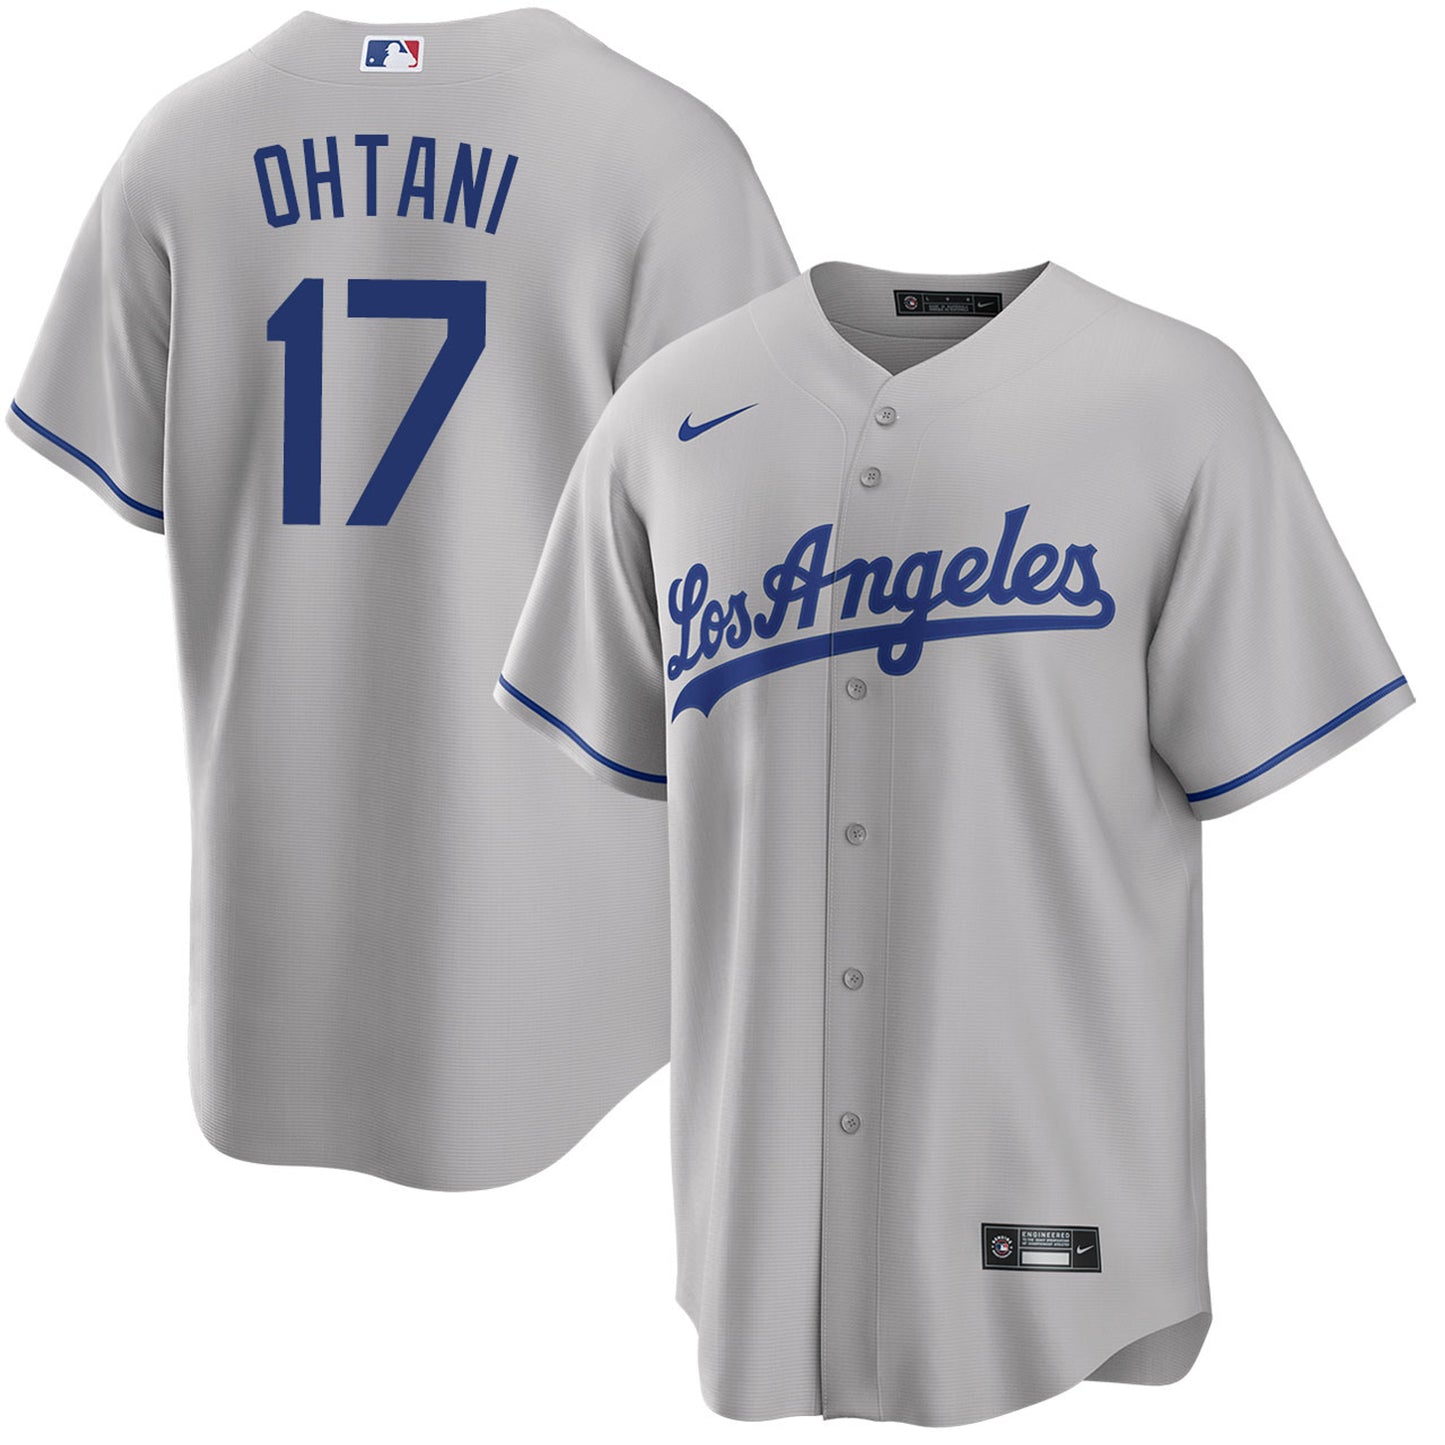 Youth Shohei Ohtani Los Angeles Dodgers Player Jersey